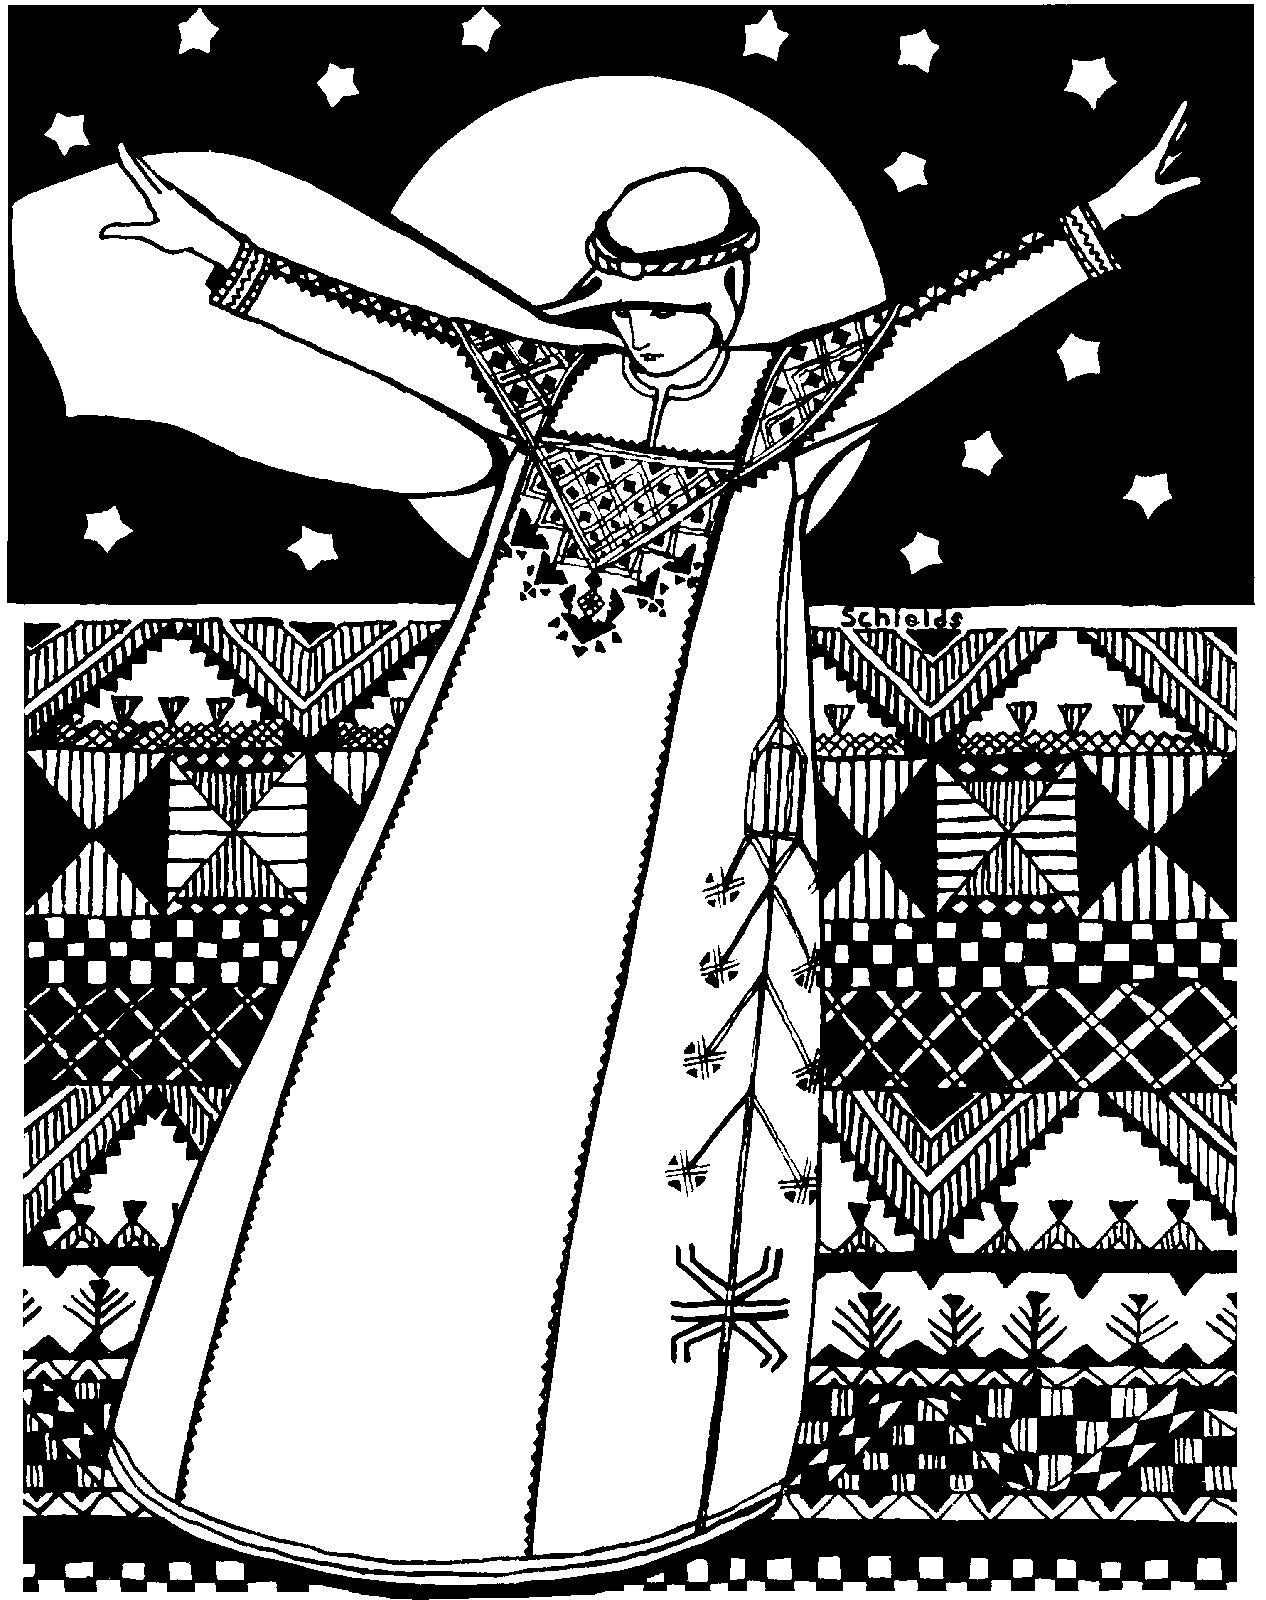 black and white pen and ink drawing by Gretchen Shields.  Woman standing in Syrian Dress with scarf over head. Arms are spread out. An abstract background with the night sky and traditional Syrian style design behind her.  She is weari